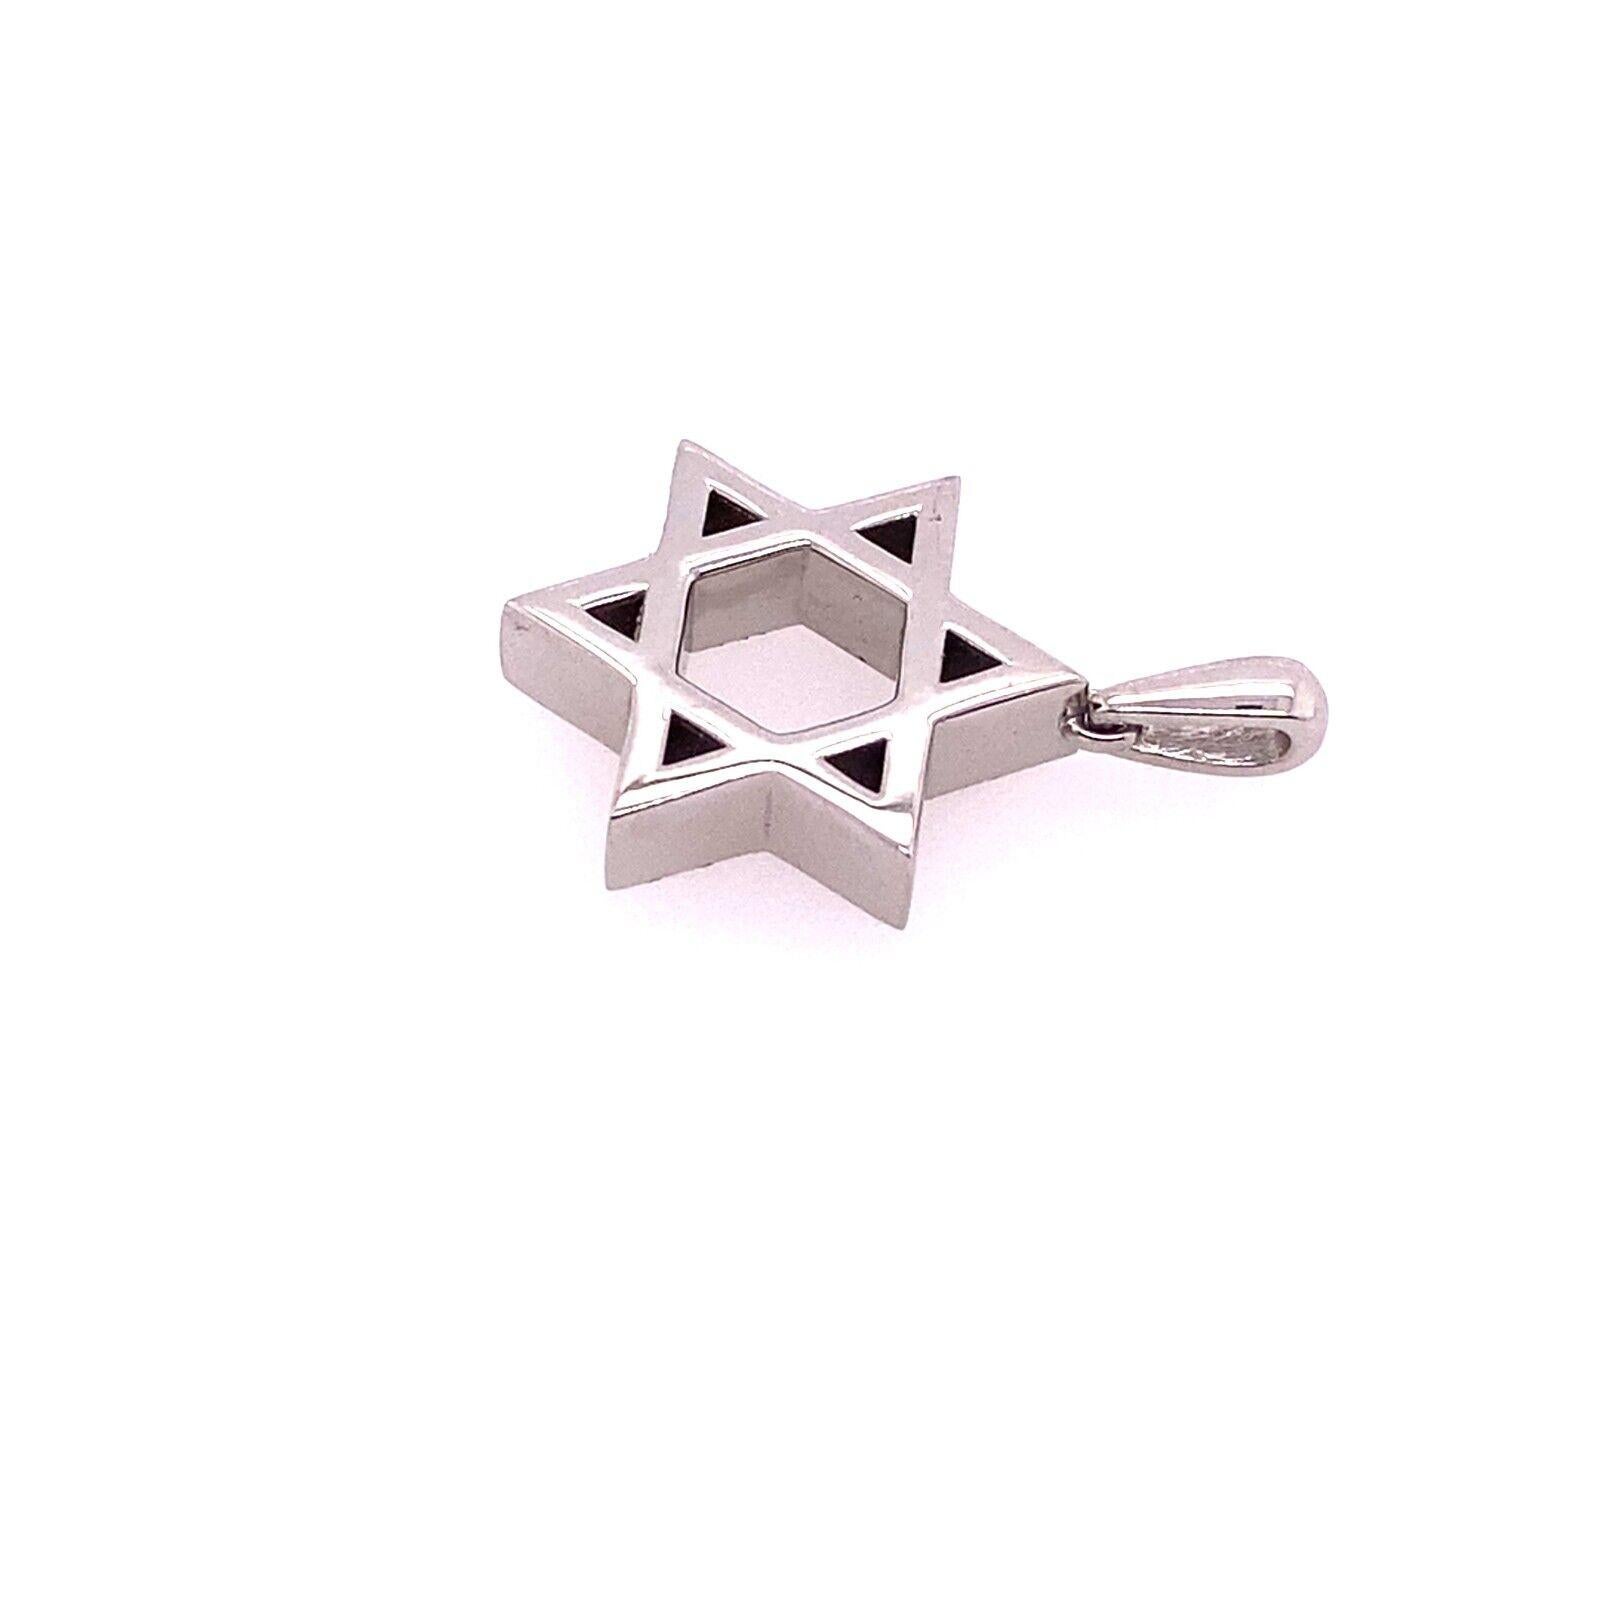 This 9ct solid White Gold Star of David pendant features a high shine finish in one side and texture on the other side, with 9ct jump ring. The pendant is 16.70mm in diameter and weighs 4.0g and is an ideal gift for any occasion.

Additional